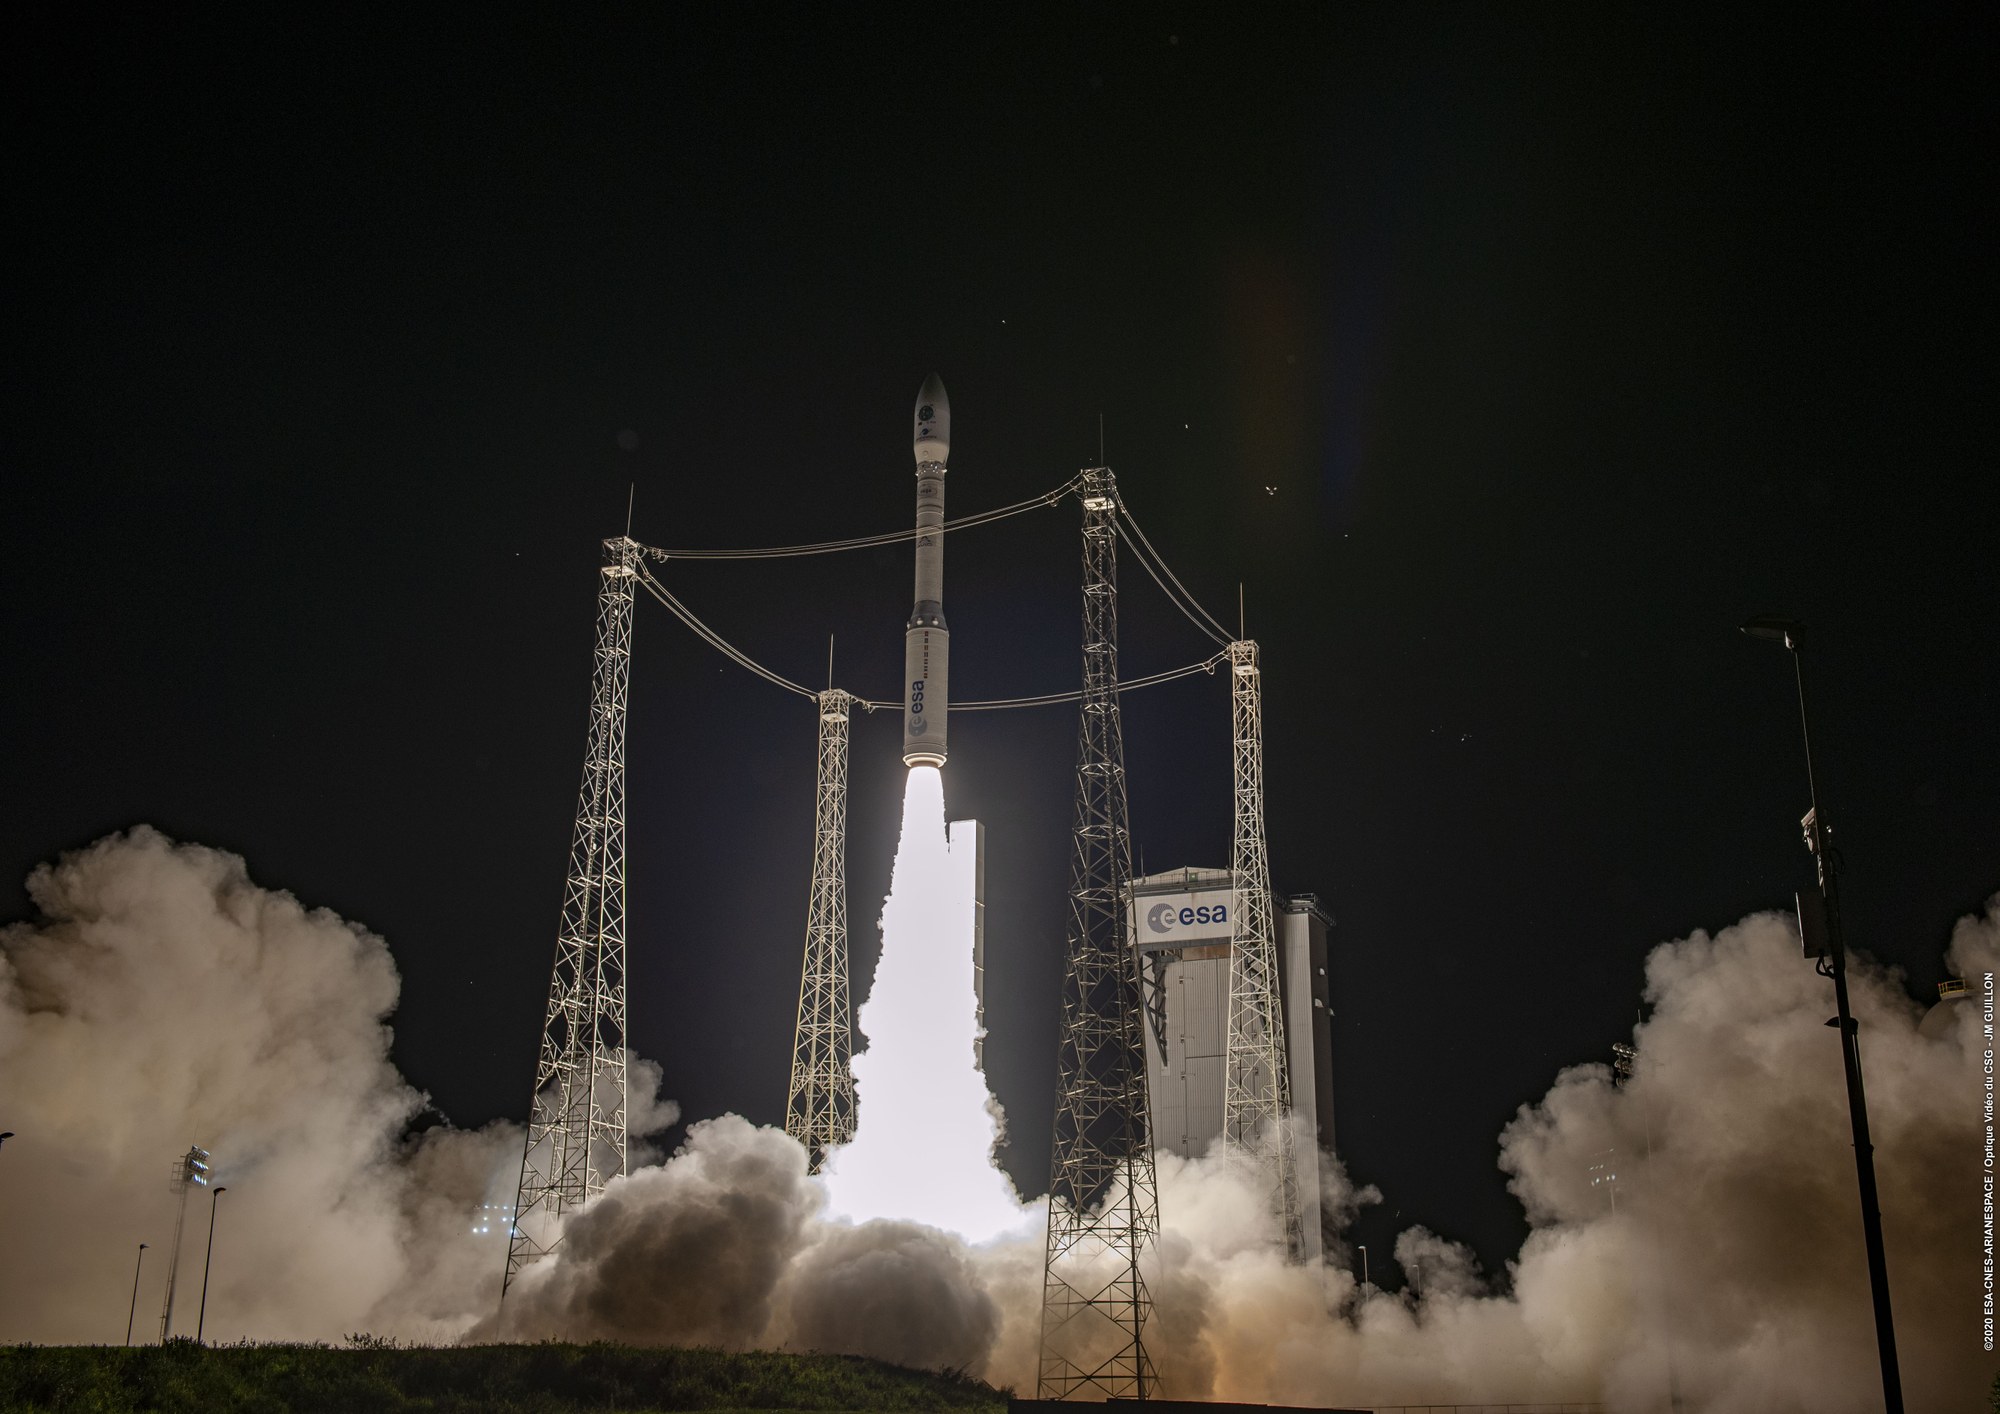 Lift-off of the Vega launch vehicle from the European spaceport in French Guiana